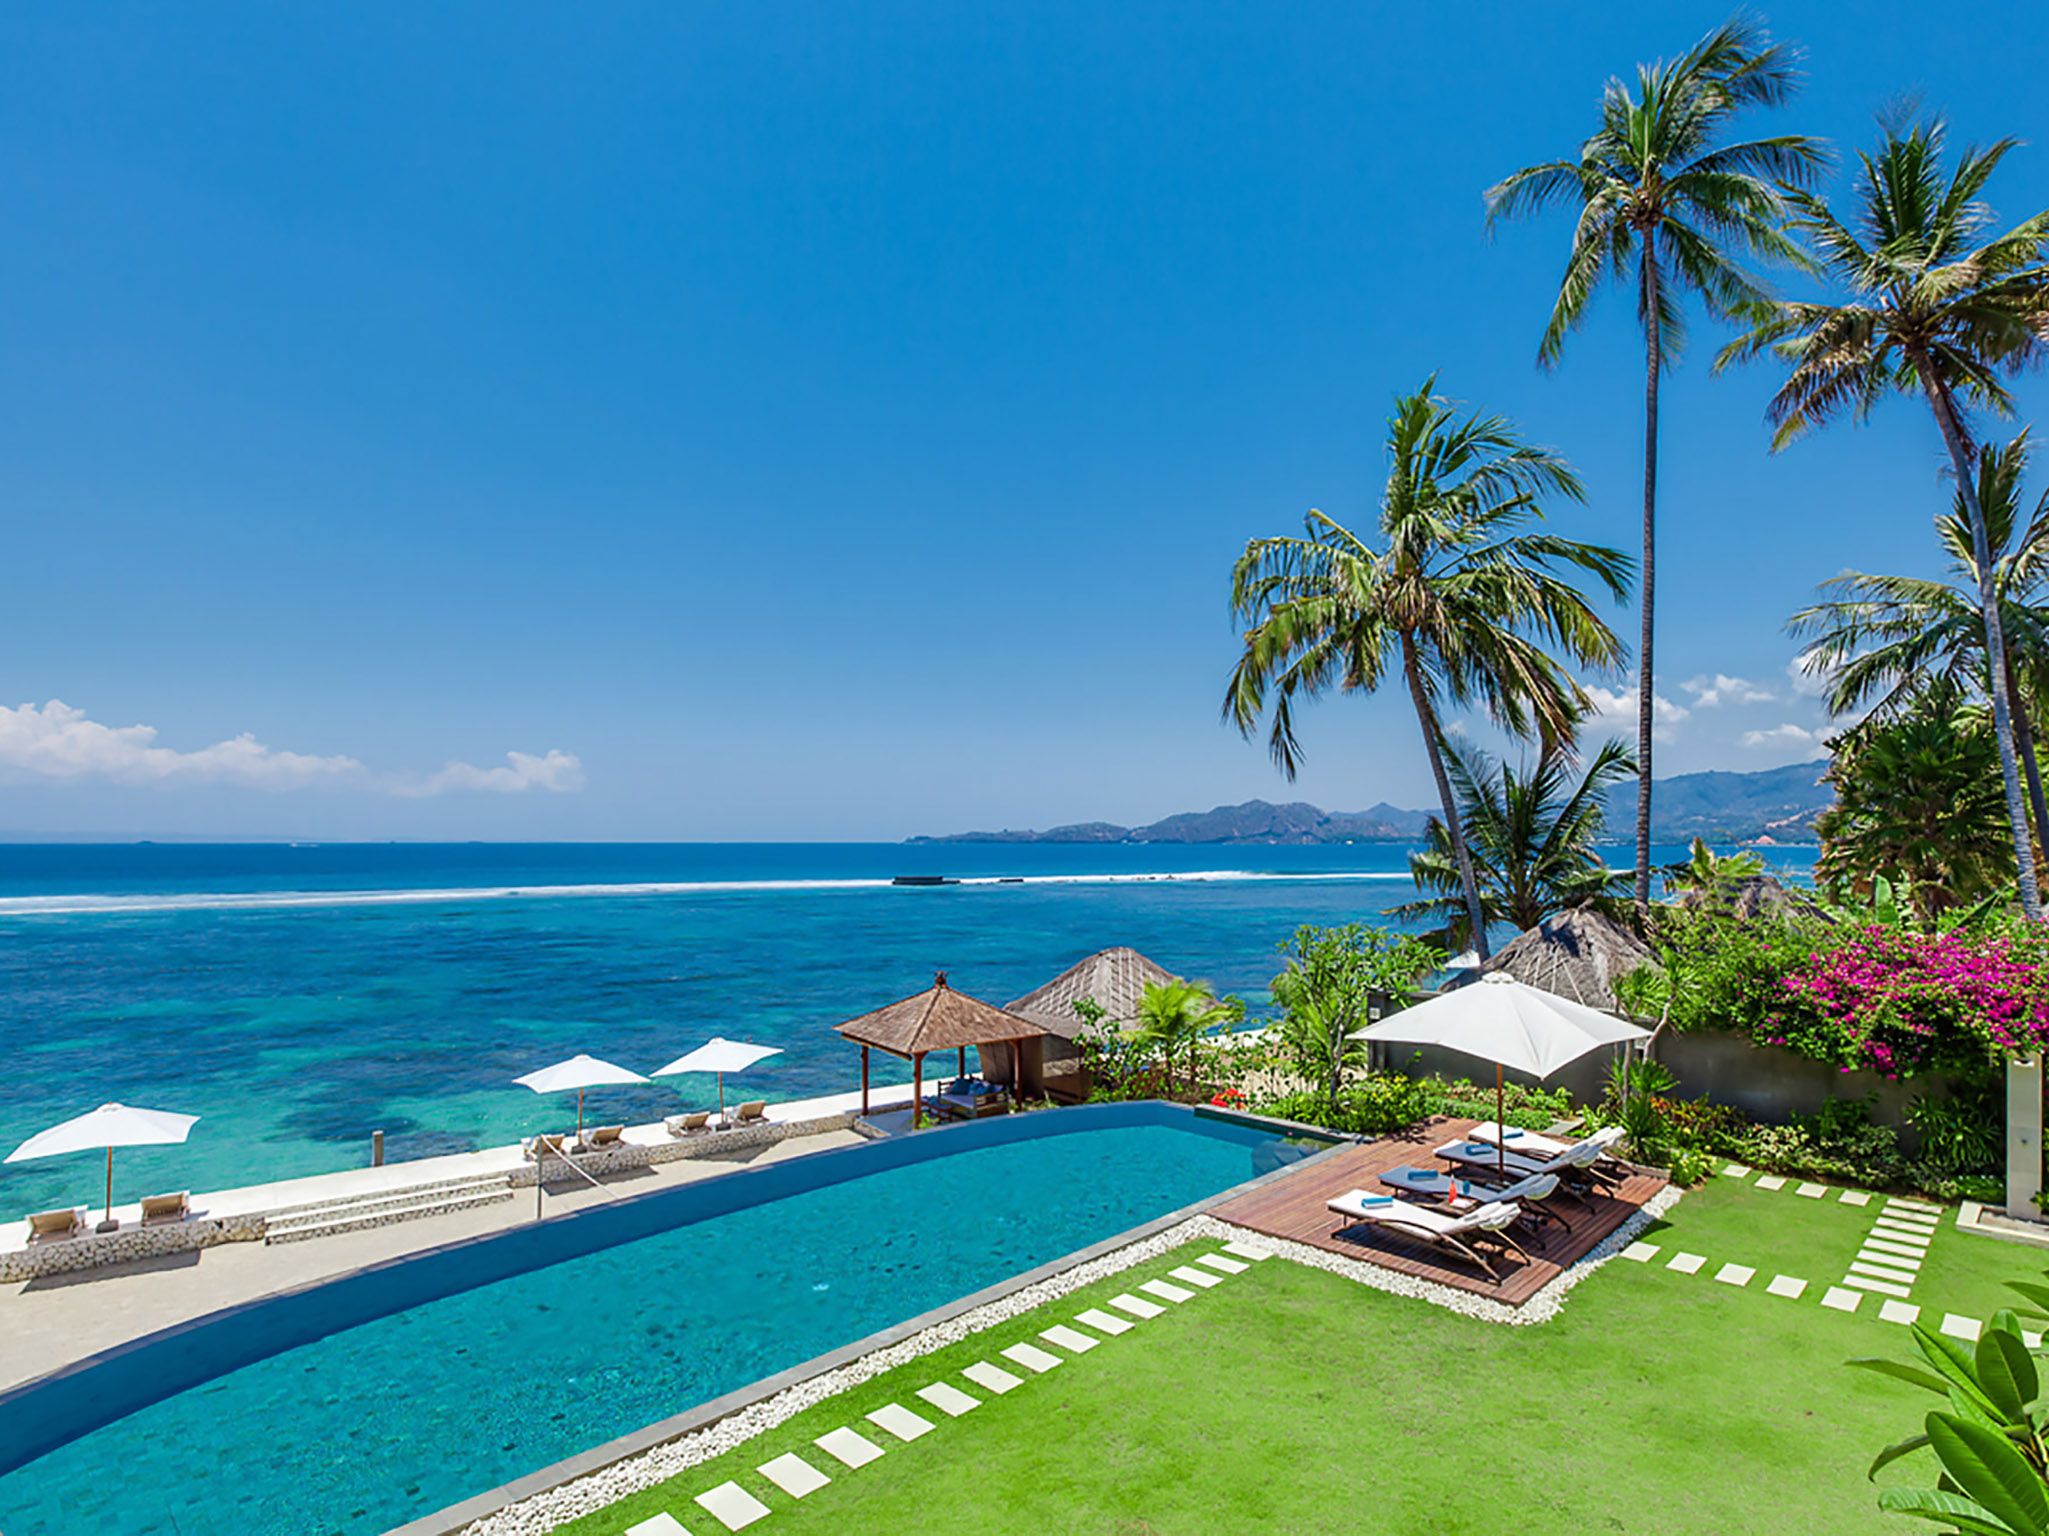 Villa Tirta Nila - This private paradise is only for you